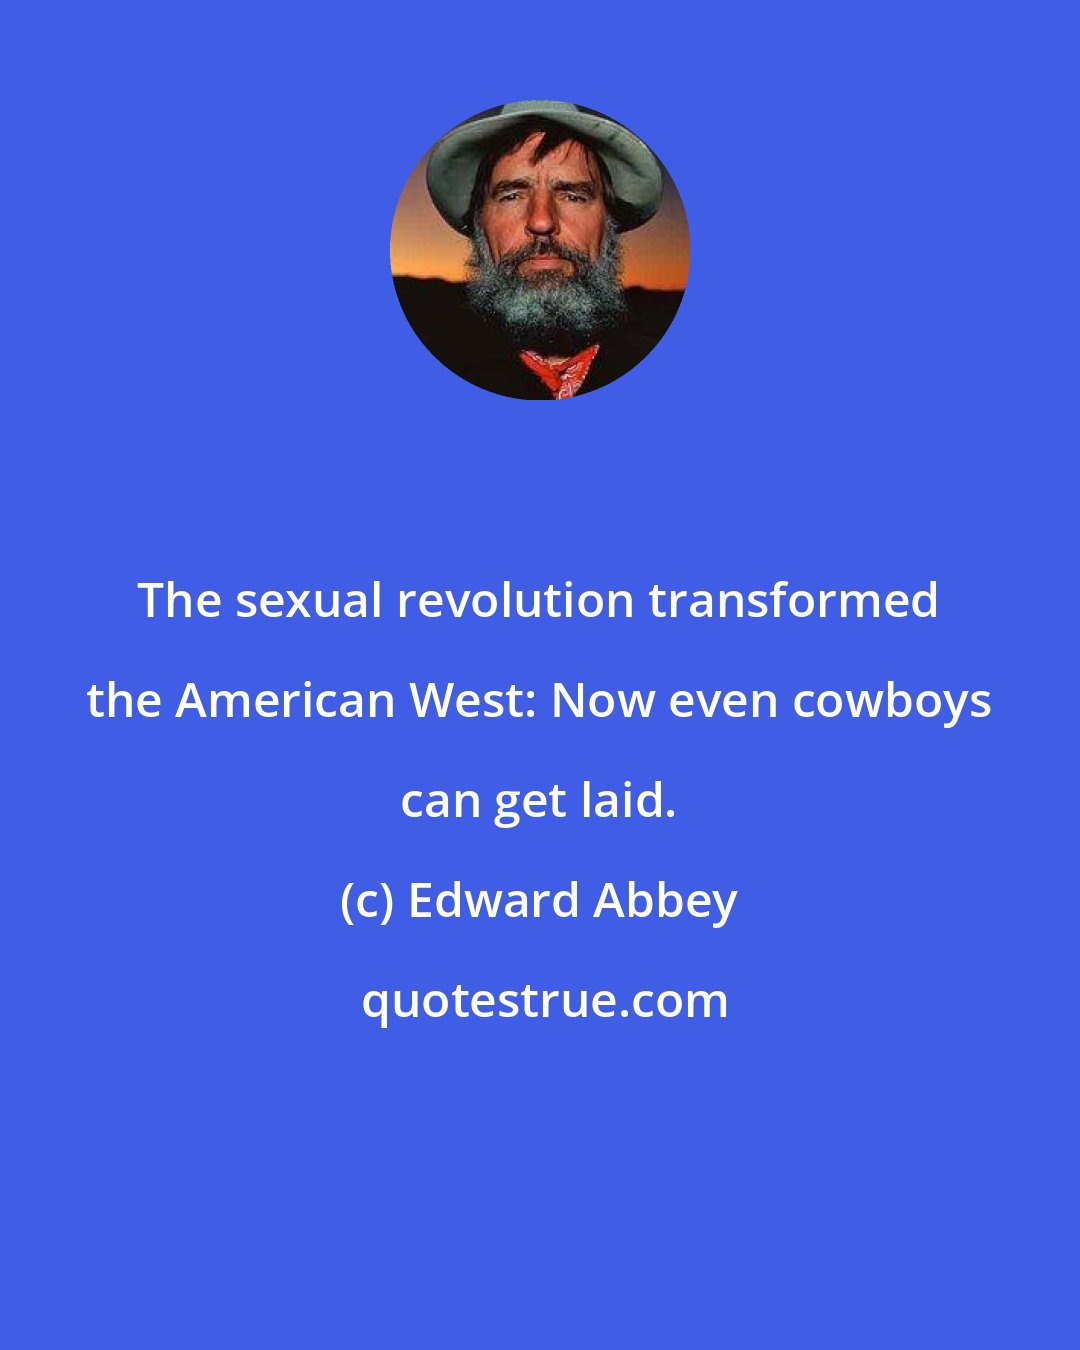 Edward Abbey: The sexual revolution transformed the American West: Now even cowboys can get laid.